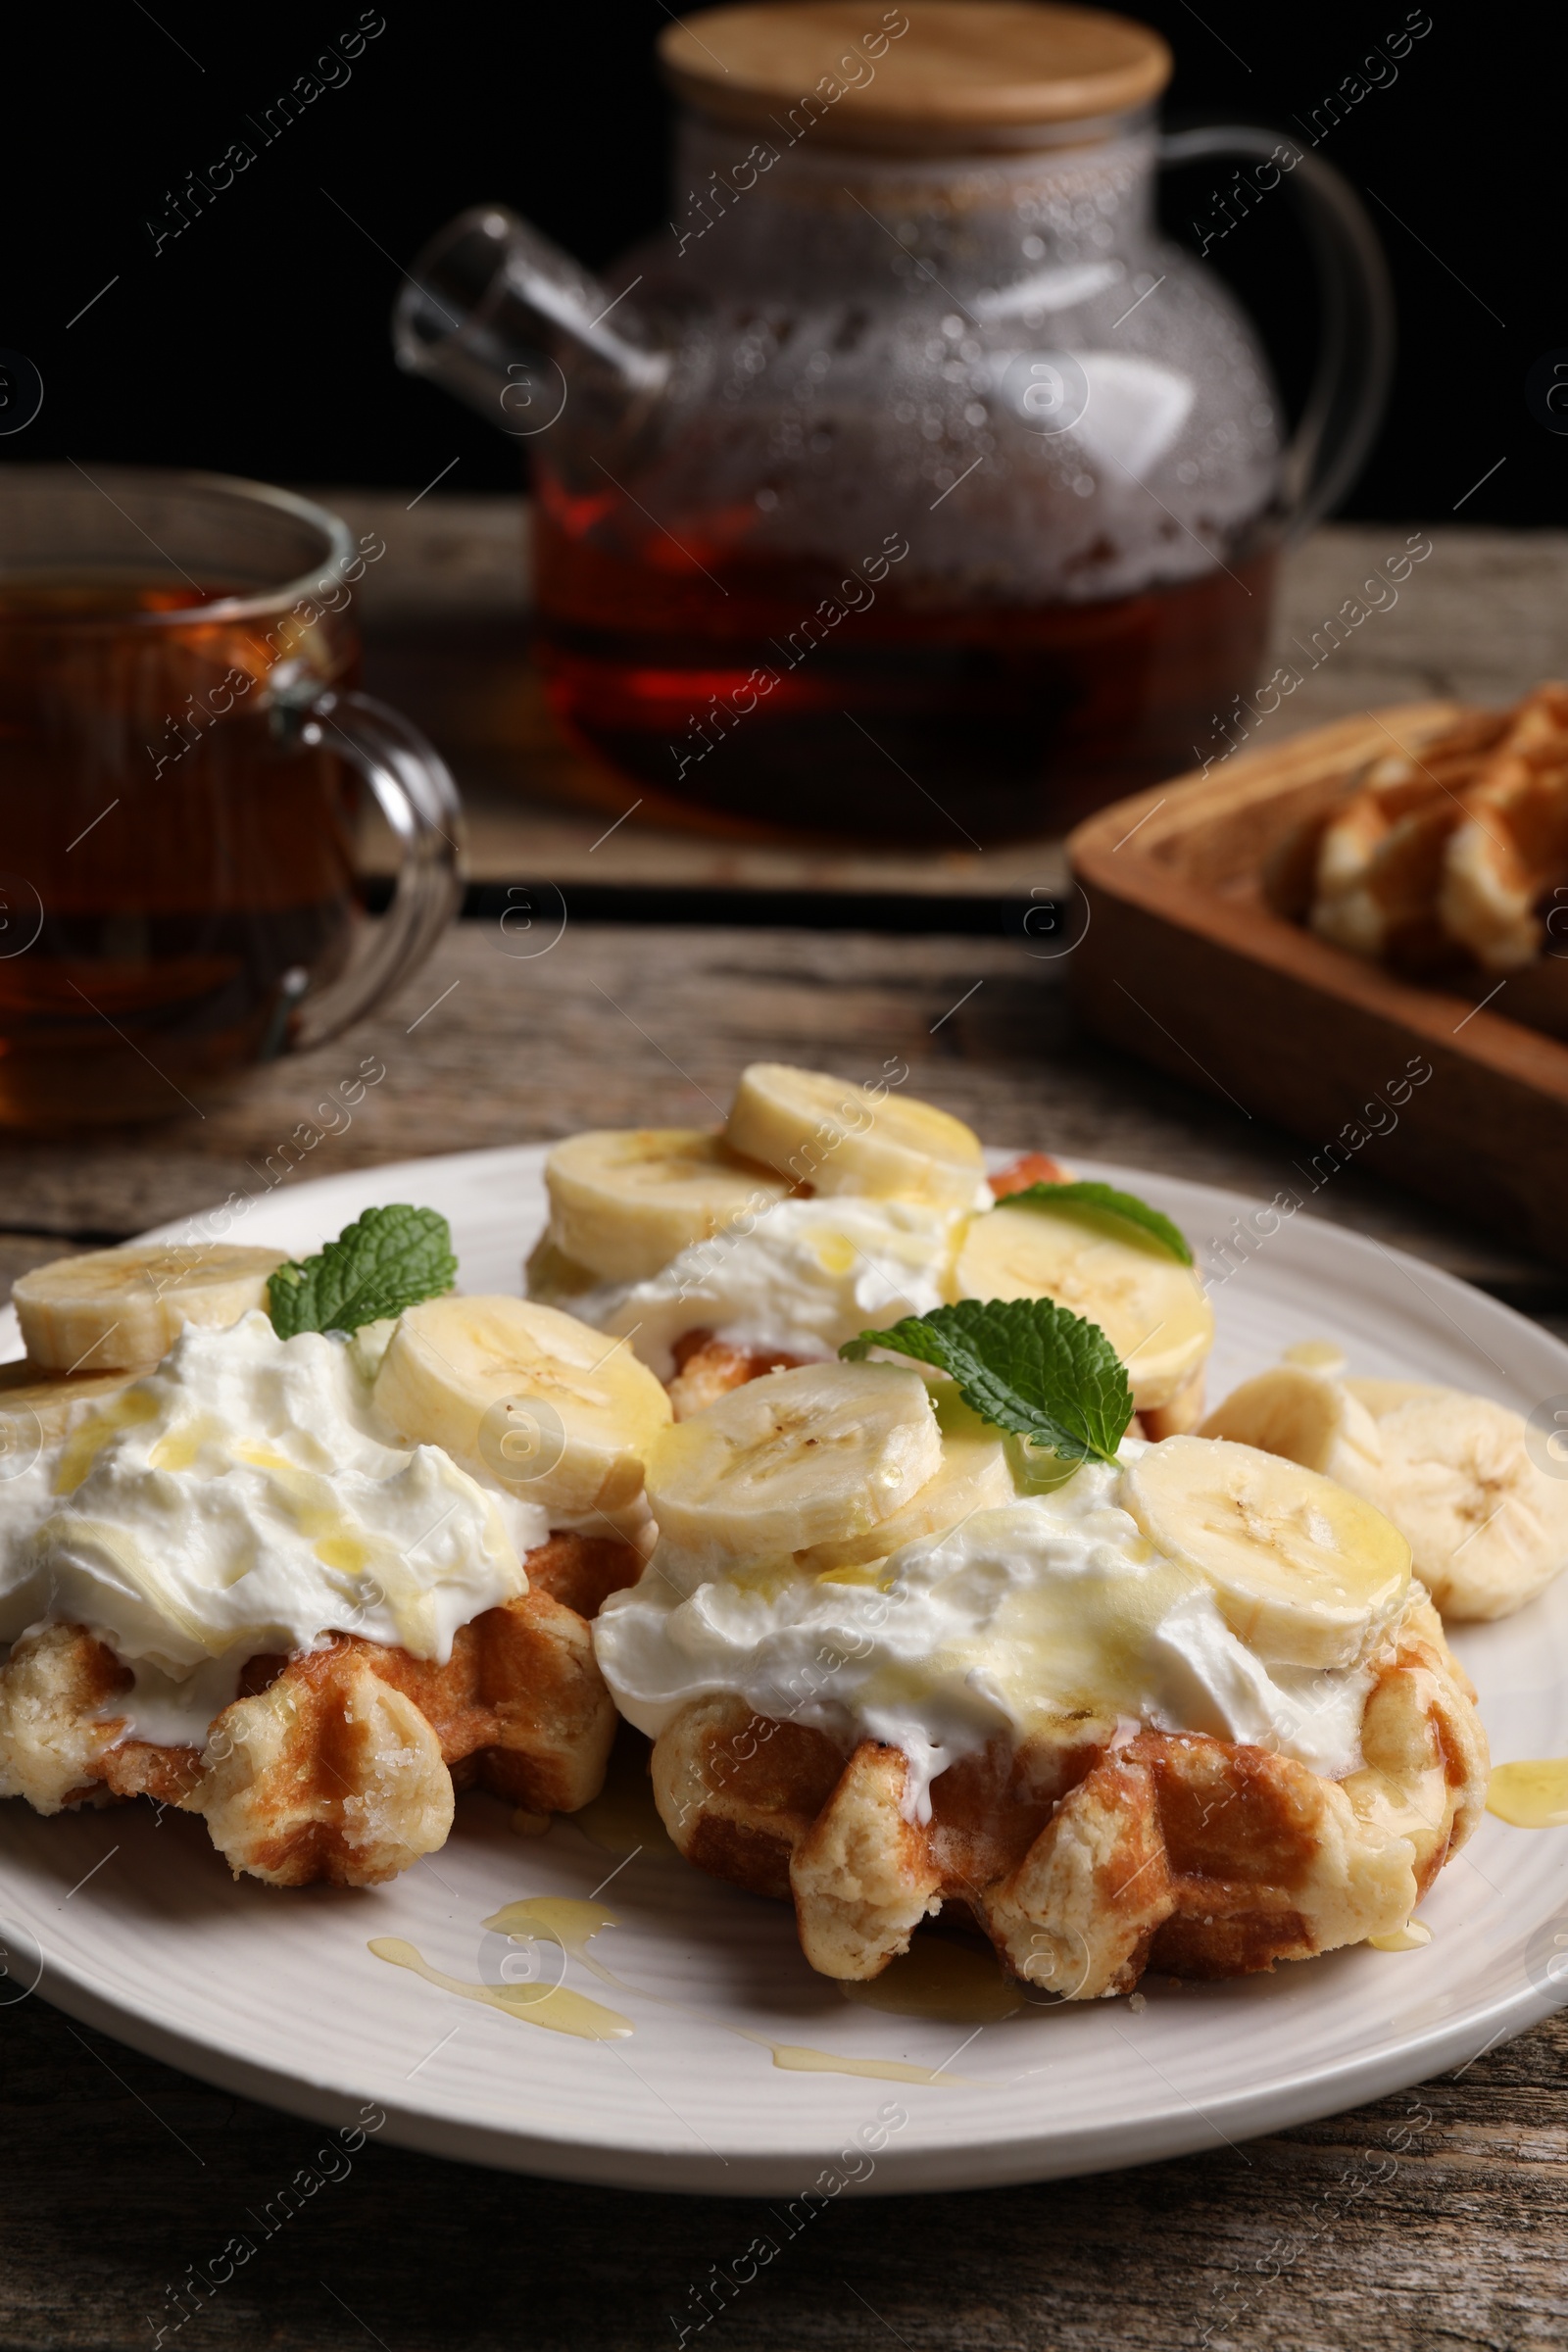 Photo of Delicious Belgian waffles with banana and whipped cream served on wooden table